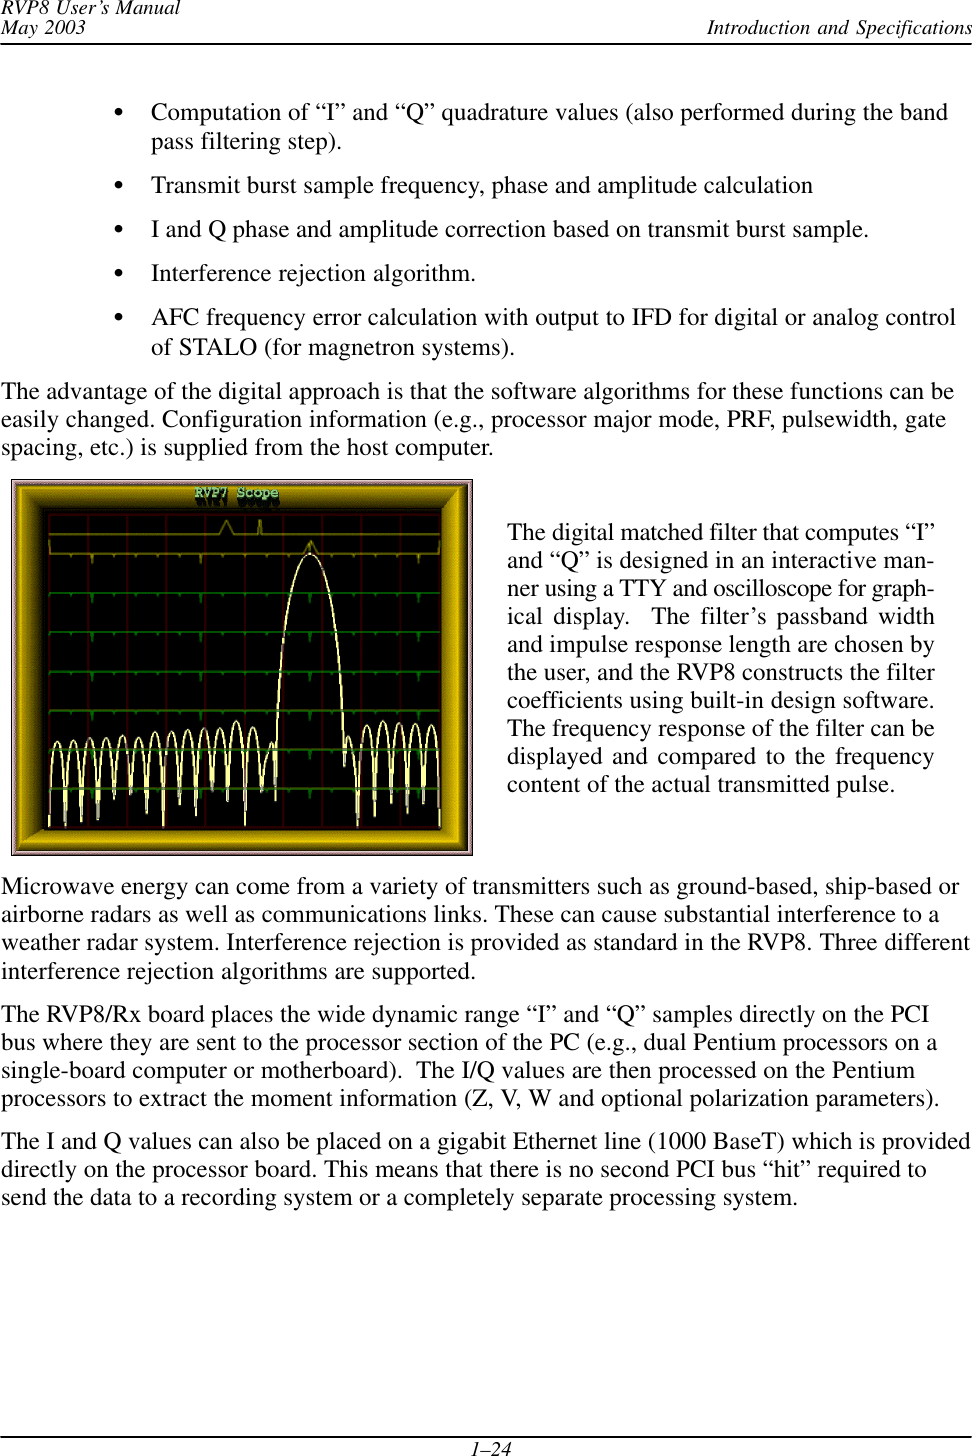 Introduction and SpecificationsRVP8 User’s ManualMay 20031–24Computation of “I” and “Q” quadrature values (also performed during the bandpass filtering step).Transmit burst sample frequency, phase and amplitude calculationI and Q phase and amplitude correction based on transmit burst sample.Interference rejection algorithm.AFC frequency error calculation with output to IFD for digital or analog controlof STALO (for magnetron systems).The advantage of the digital approach is that the software algorithms for these functions can beeasily changed. Configuration information (e.g., processor major mode, PRF, pulsewidth, gatespacing, etc.) is supplied from the host computer.The digital matched filter that computes “I”and “Q” is designed in an interactive man-ner using a TTY and oscilloscope for graph-ical display.  The filter’s passband widthand impulse response length are chosen bythe user, and the RVP8 constructs the filtercoefficients using built-in design software.The frequency response of the filter can bedisplayed and compared to the frequencycontent of the actual transmitted pulse.Microwave energy can come from a variety of transmitters such as ground-based, ship-based orairborne radars as well as communications links. These can cause substantial interference to aweather radar system. Interference rejection is provided as standard in the RVP8. Three differentinterference rejection algorithms are supported.The RVP8/Rx board places the wide dynamic range “I” and “Q” samples directly on the PCIbus where they are sent to the processor section of the PC (e.g., dual Pentium processors on asingle-board computer or motherboard).  The I/Q values are then processed on the Pentiumprocessors to extract the moment information (Z, V, W and optional polarization parameters).The I and Q values can also be placed on a gigabit Ethernet line (1000 BaseT) which is provideddirectly on the processor board. This means that there is no second PCI bus “hit” required tosend the data to a recording system or a completely separate processing system.